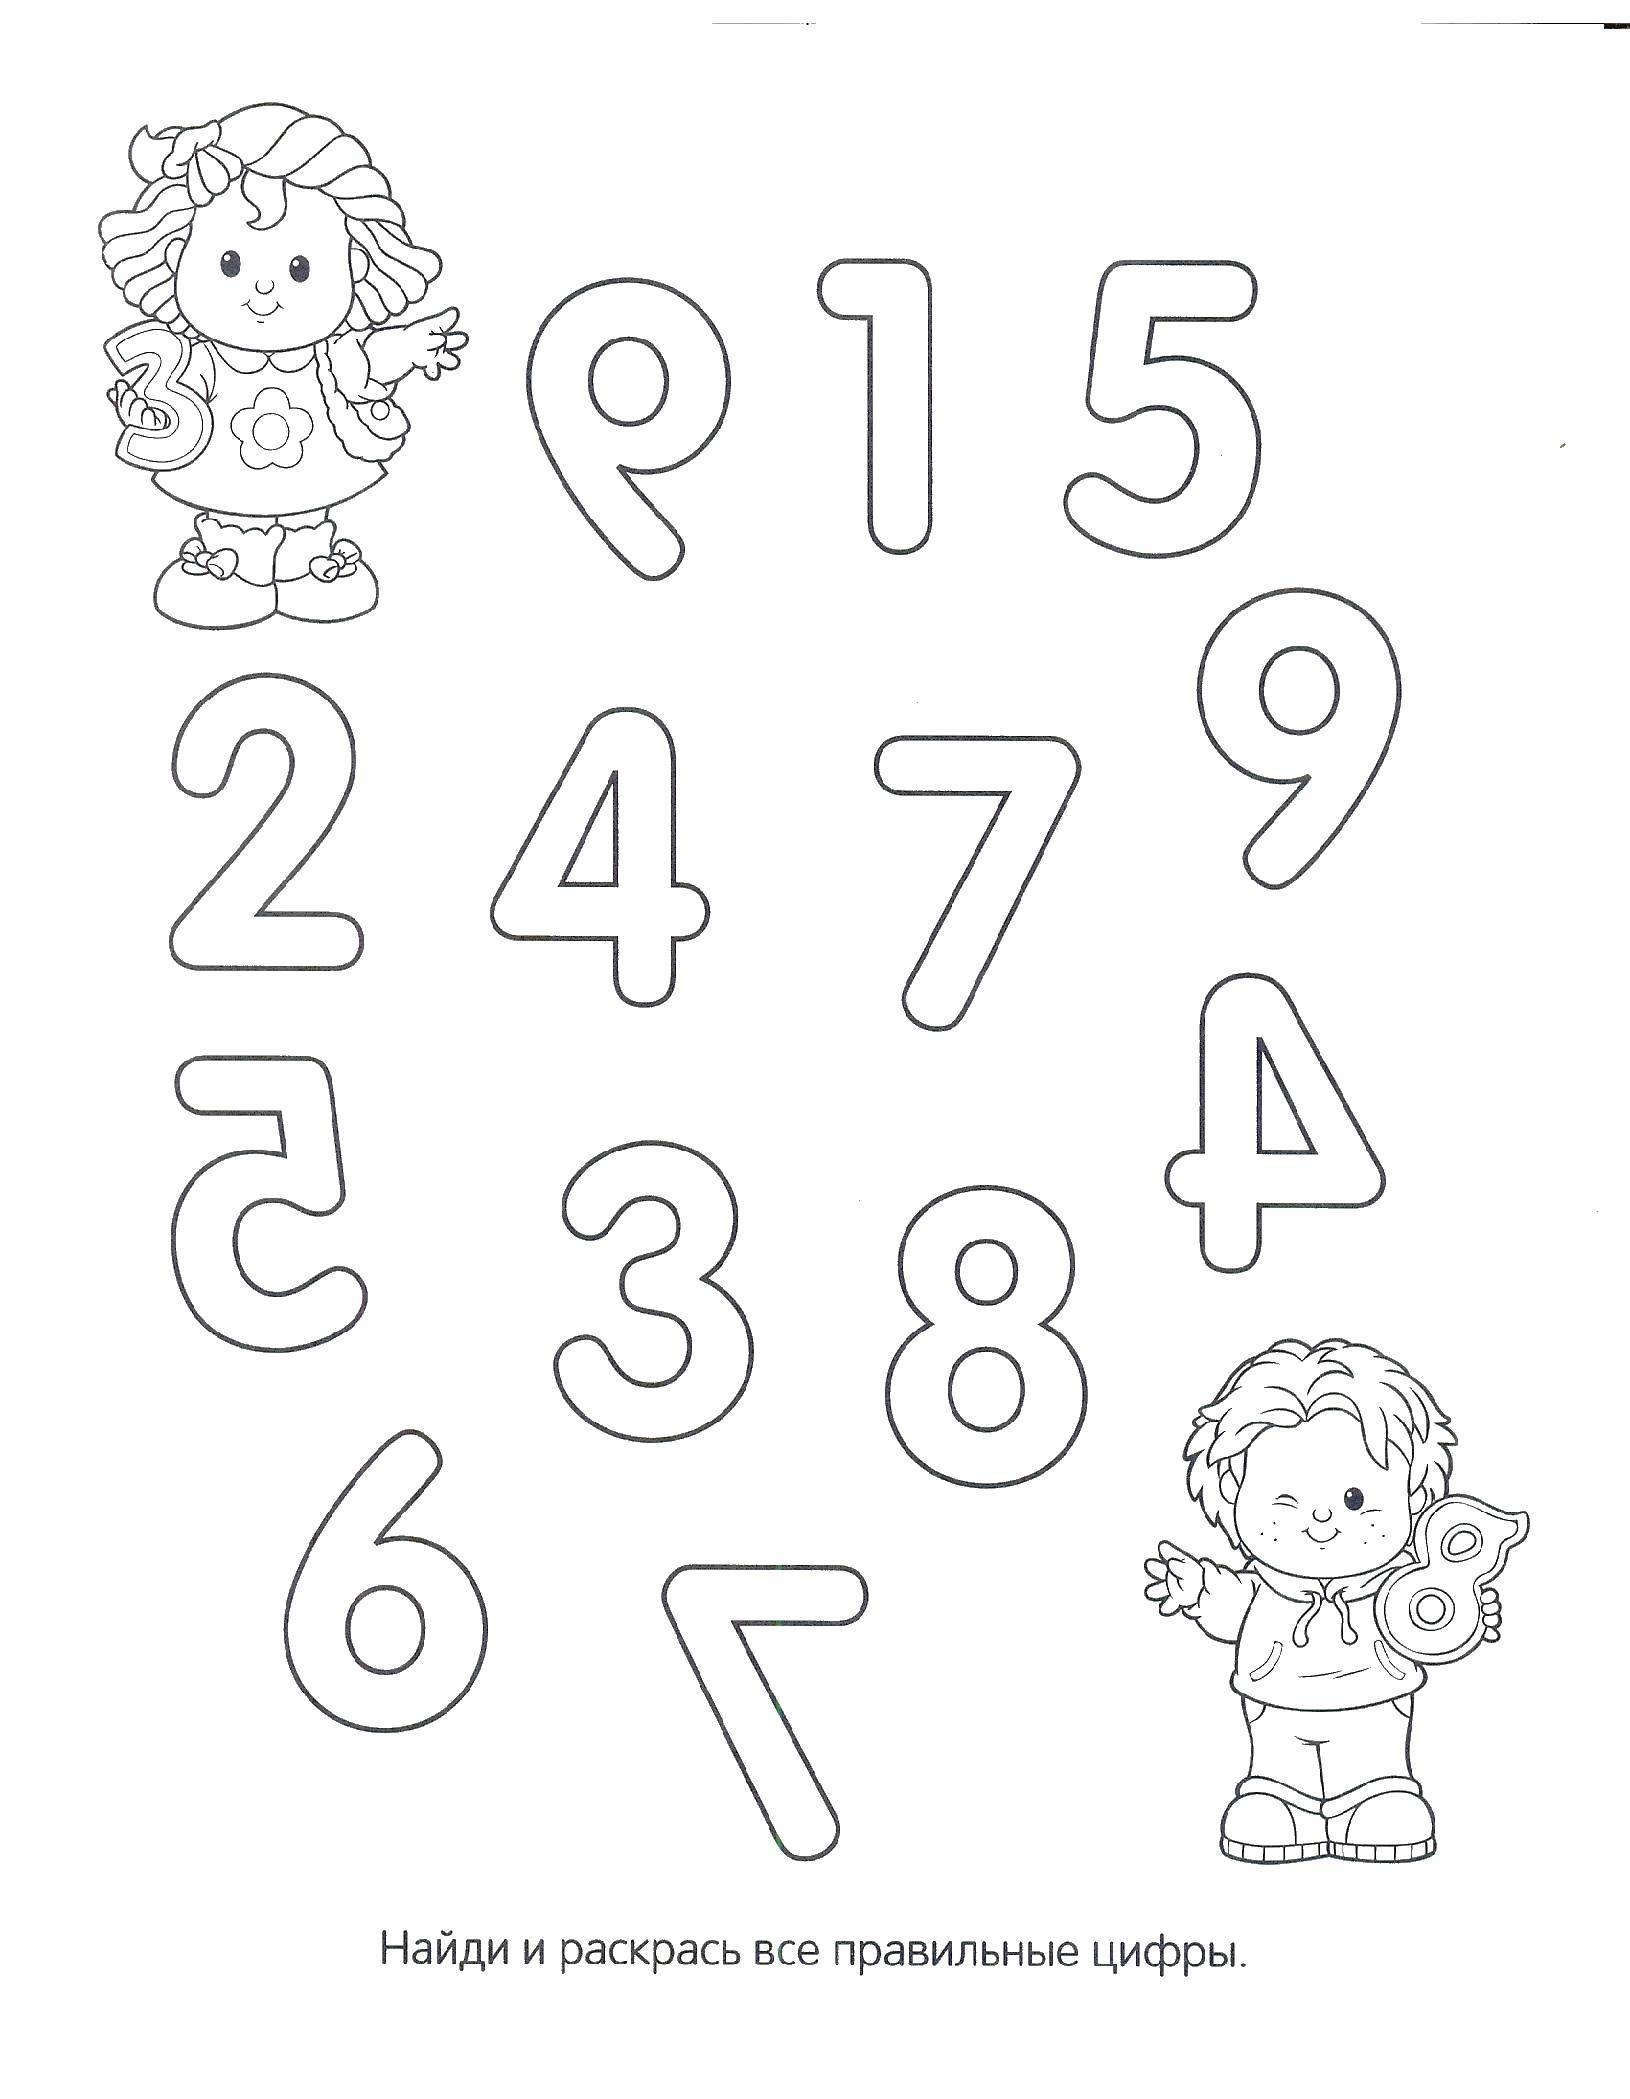 Coloring Figures. Category Numbers. Tags:  on thinking, logic, problem, numbers.